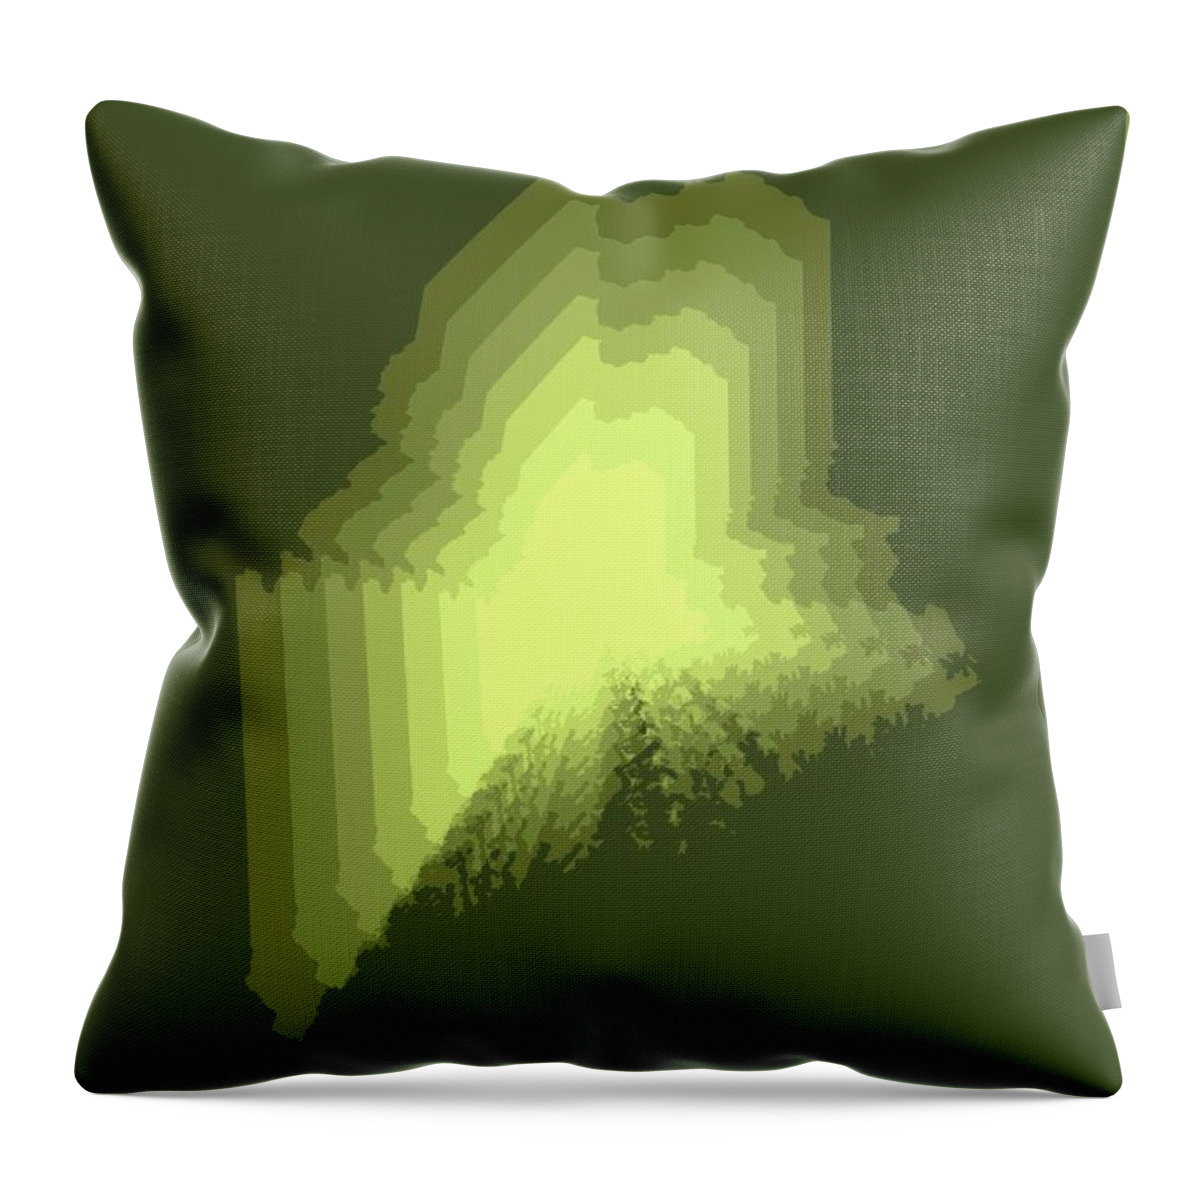 Maine Throw Pillow featuring the digital art State Map of Maine by Naxart Studio